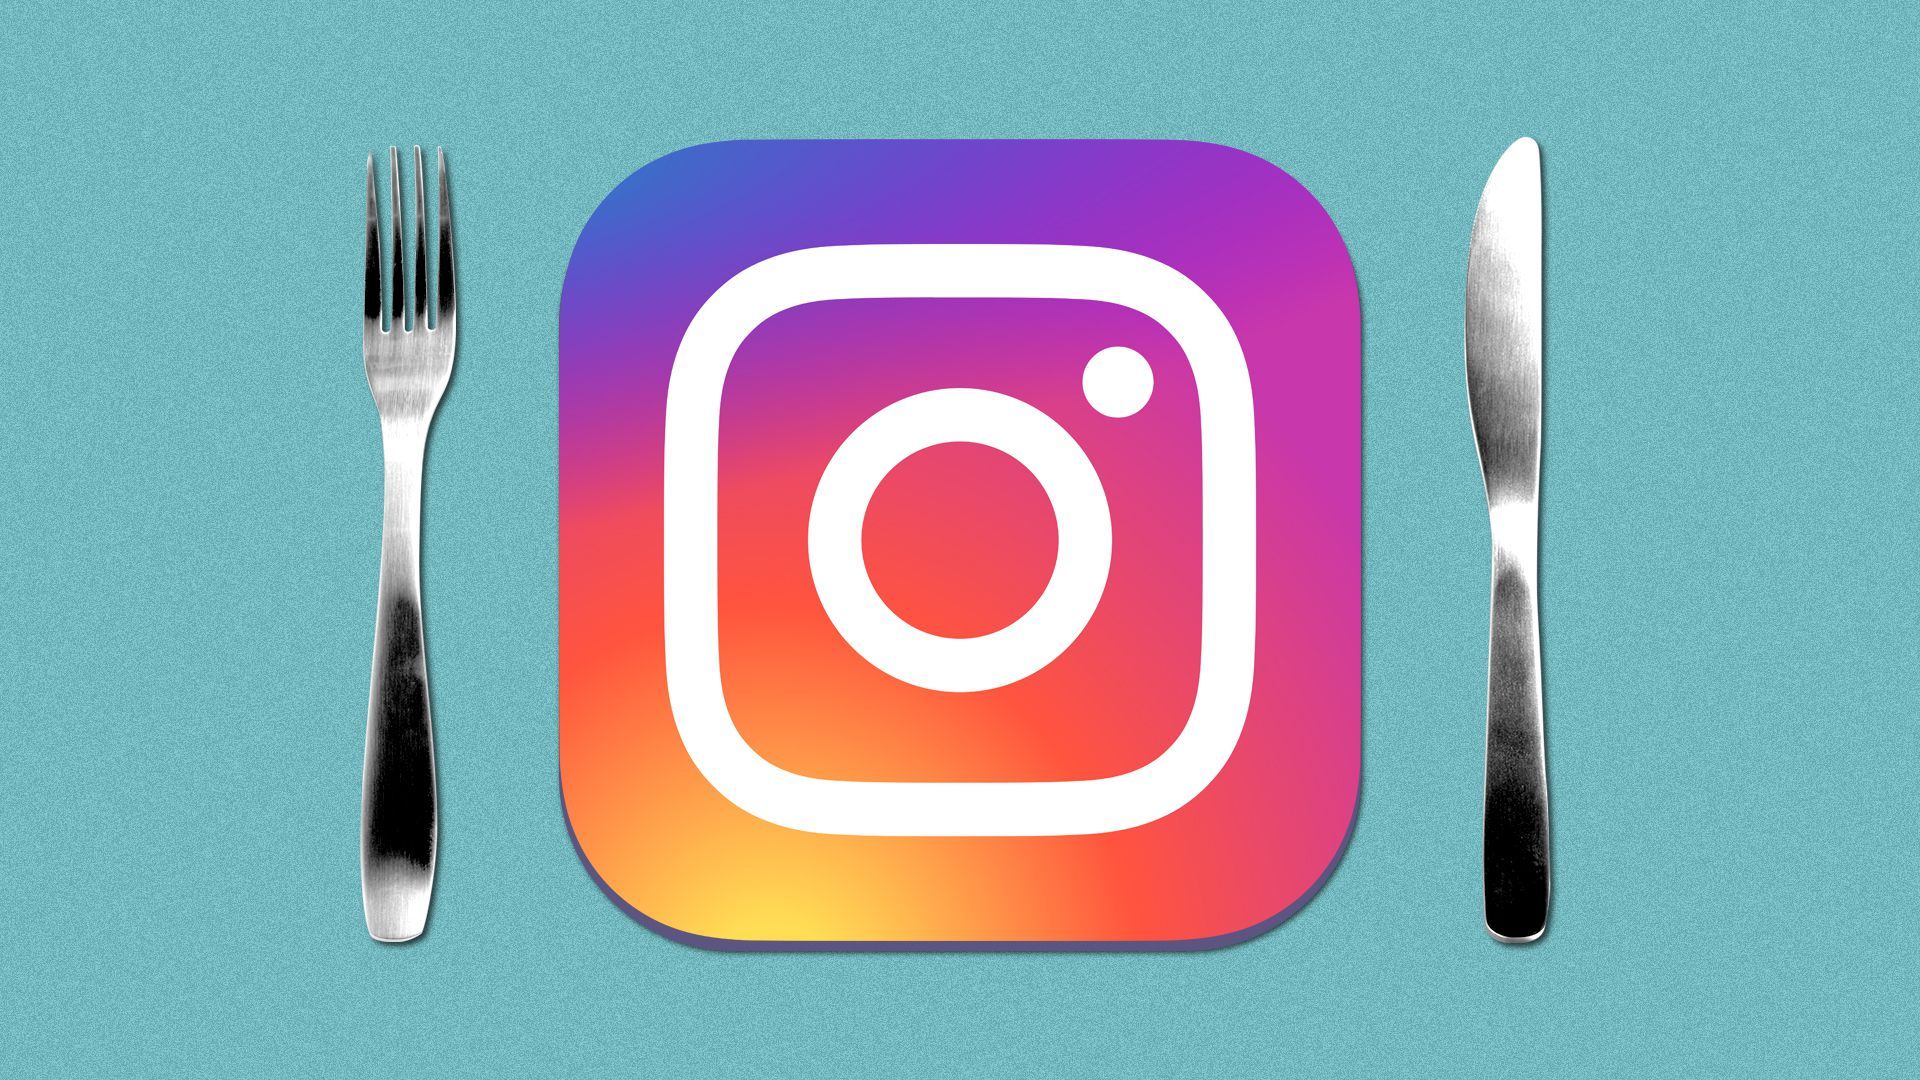 Illustration of a place setting with the Instagram app icon taking the place of a plate.